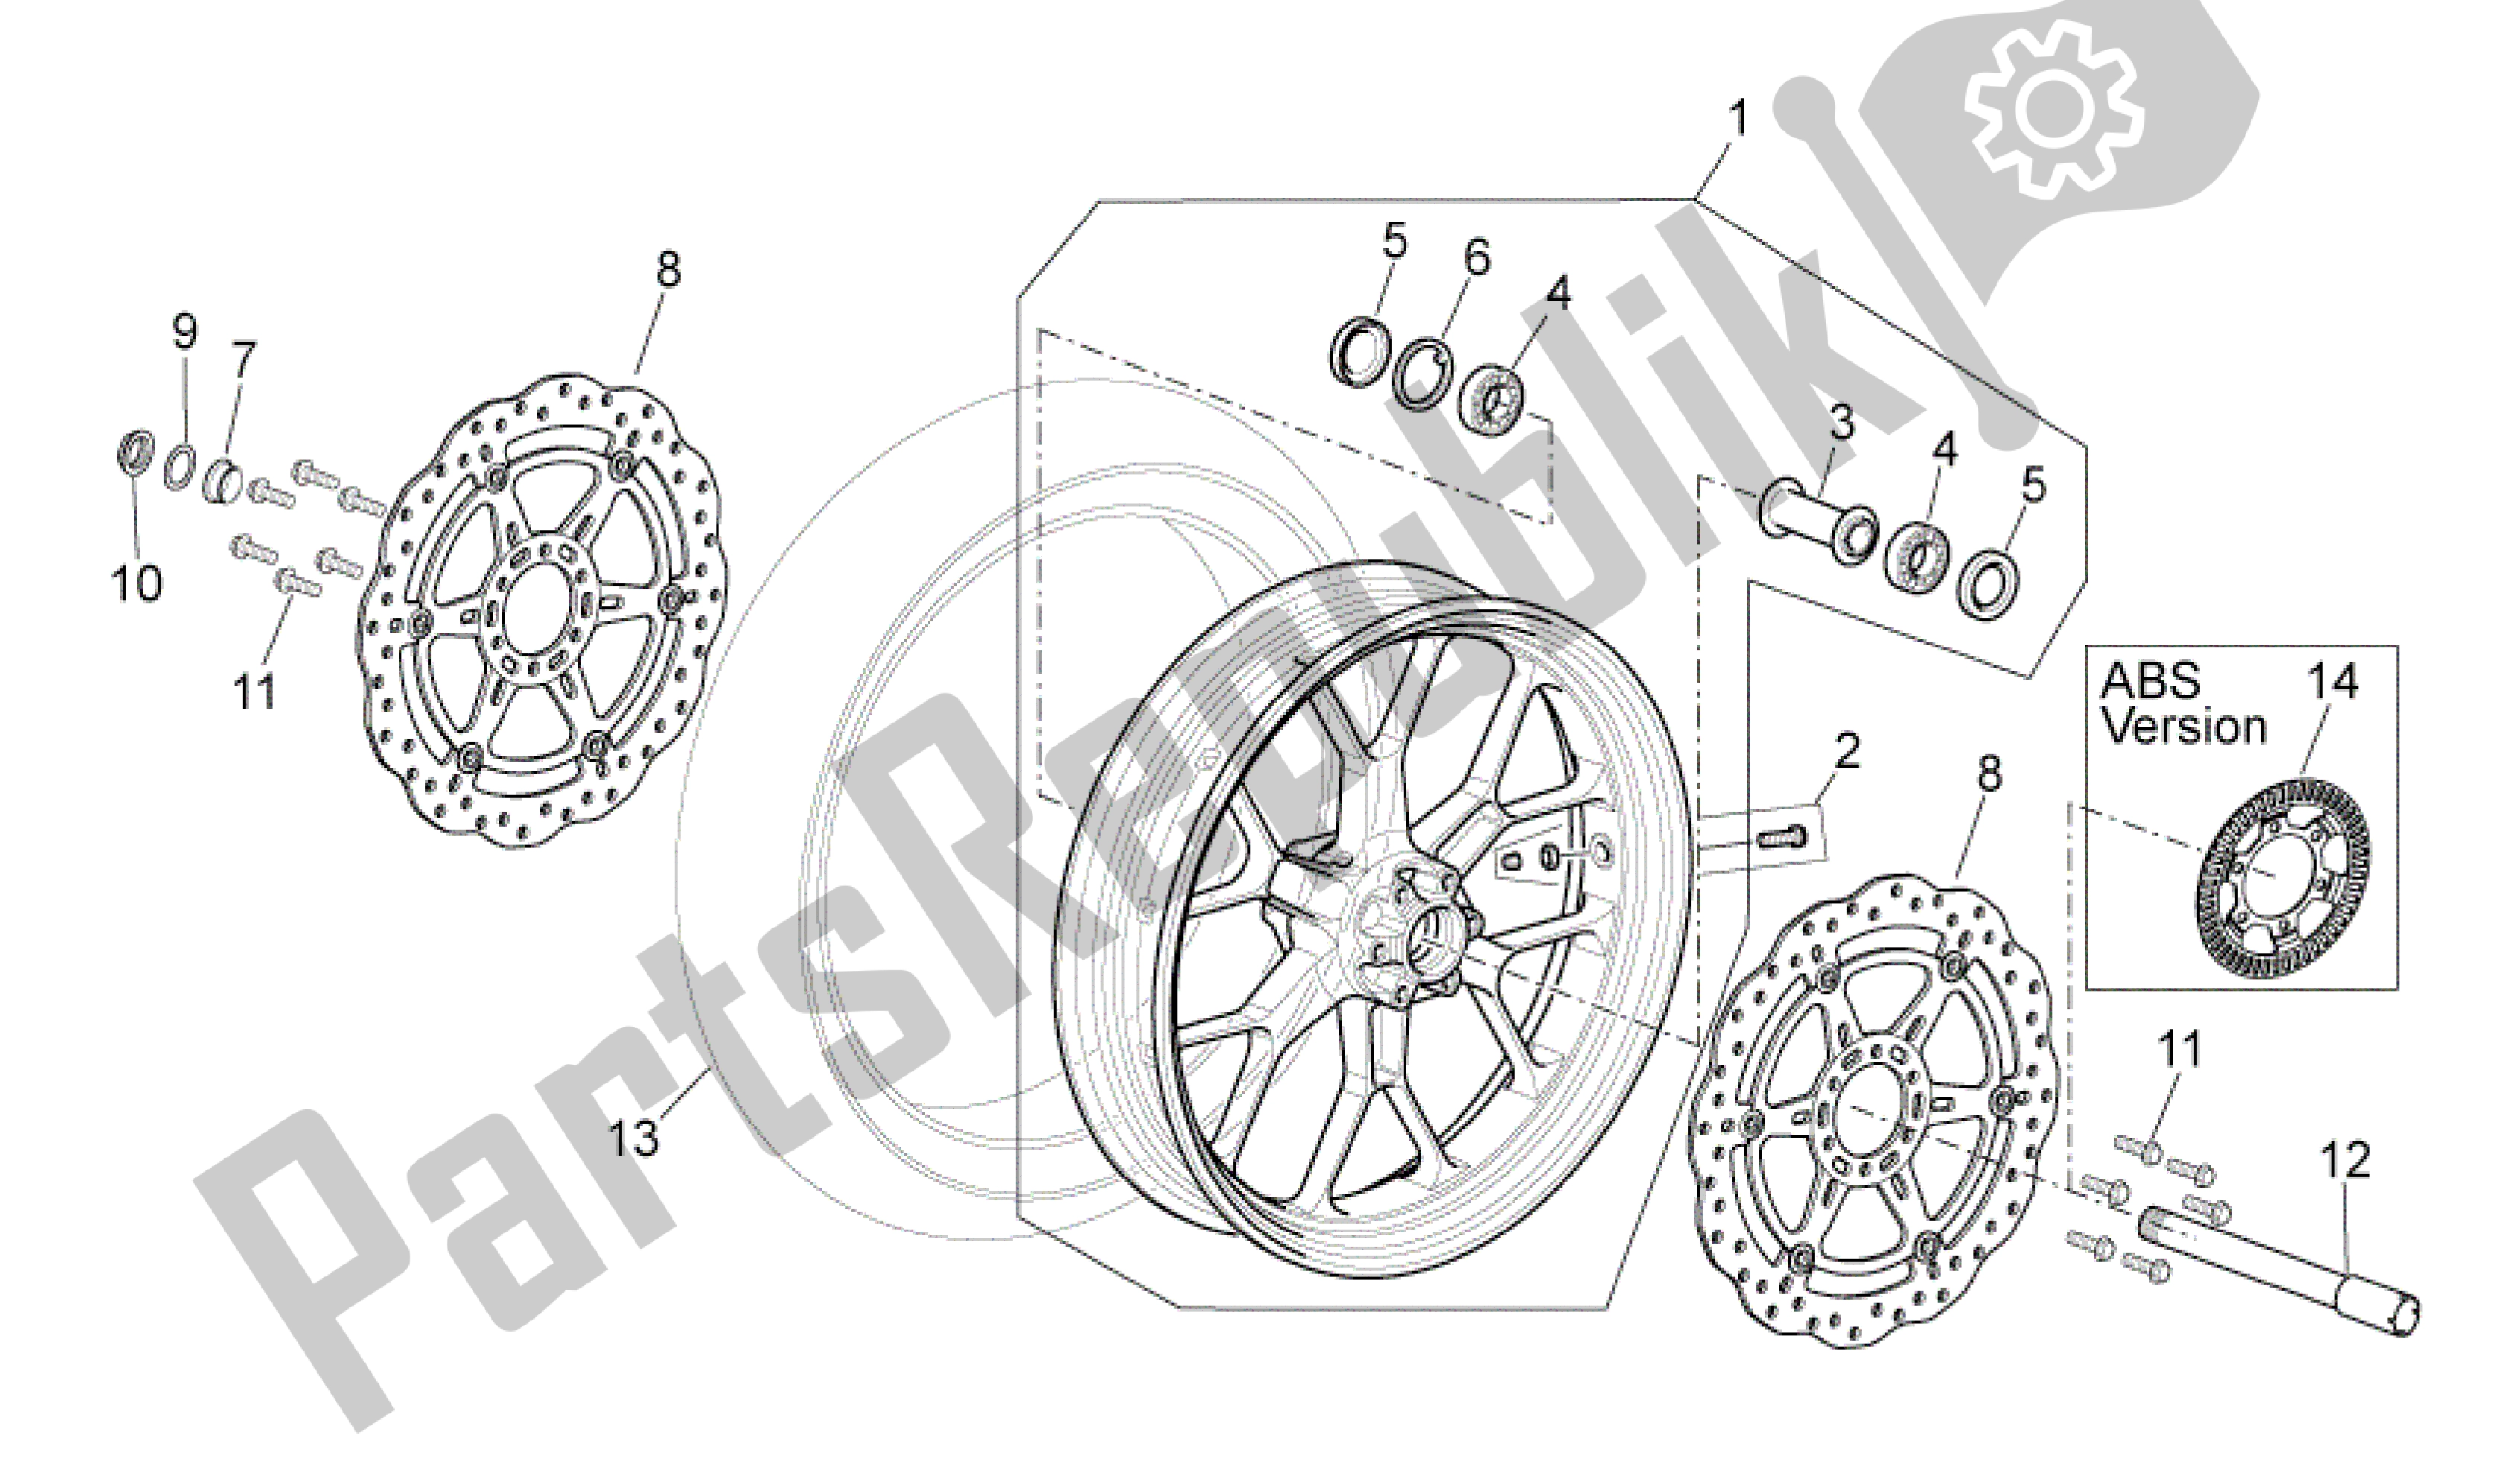 All parts for the Front Wheel of the Aprilia Shiver 750 2010 - 2013